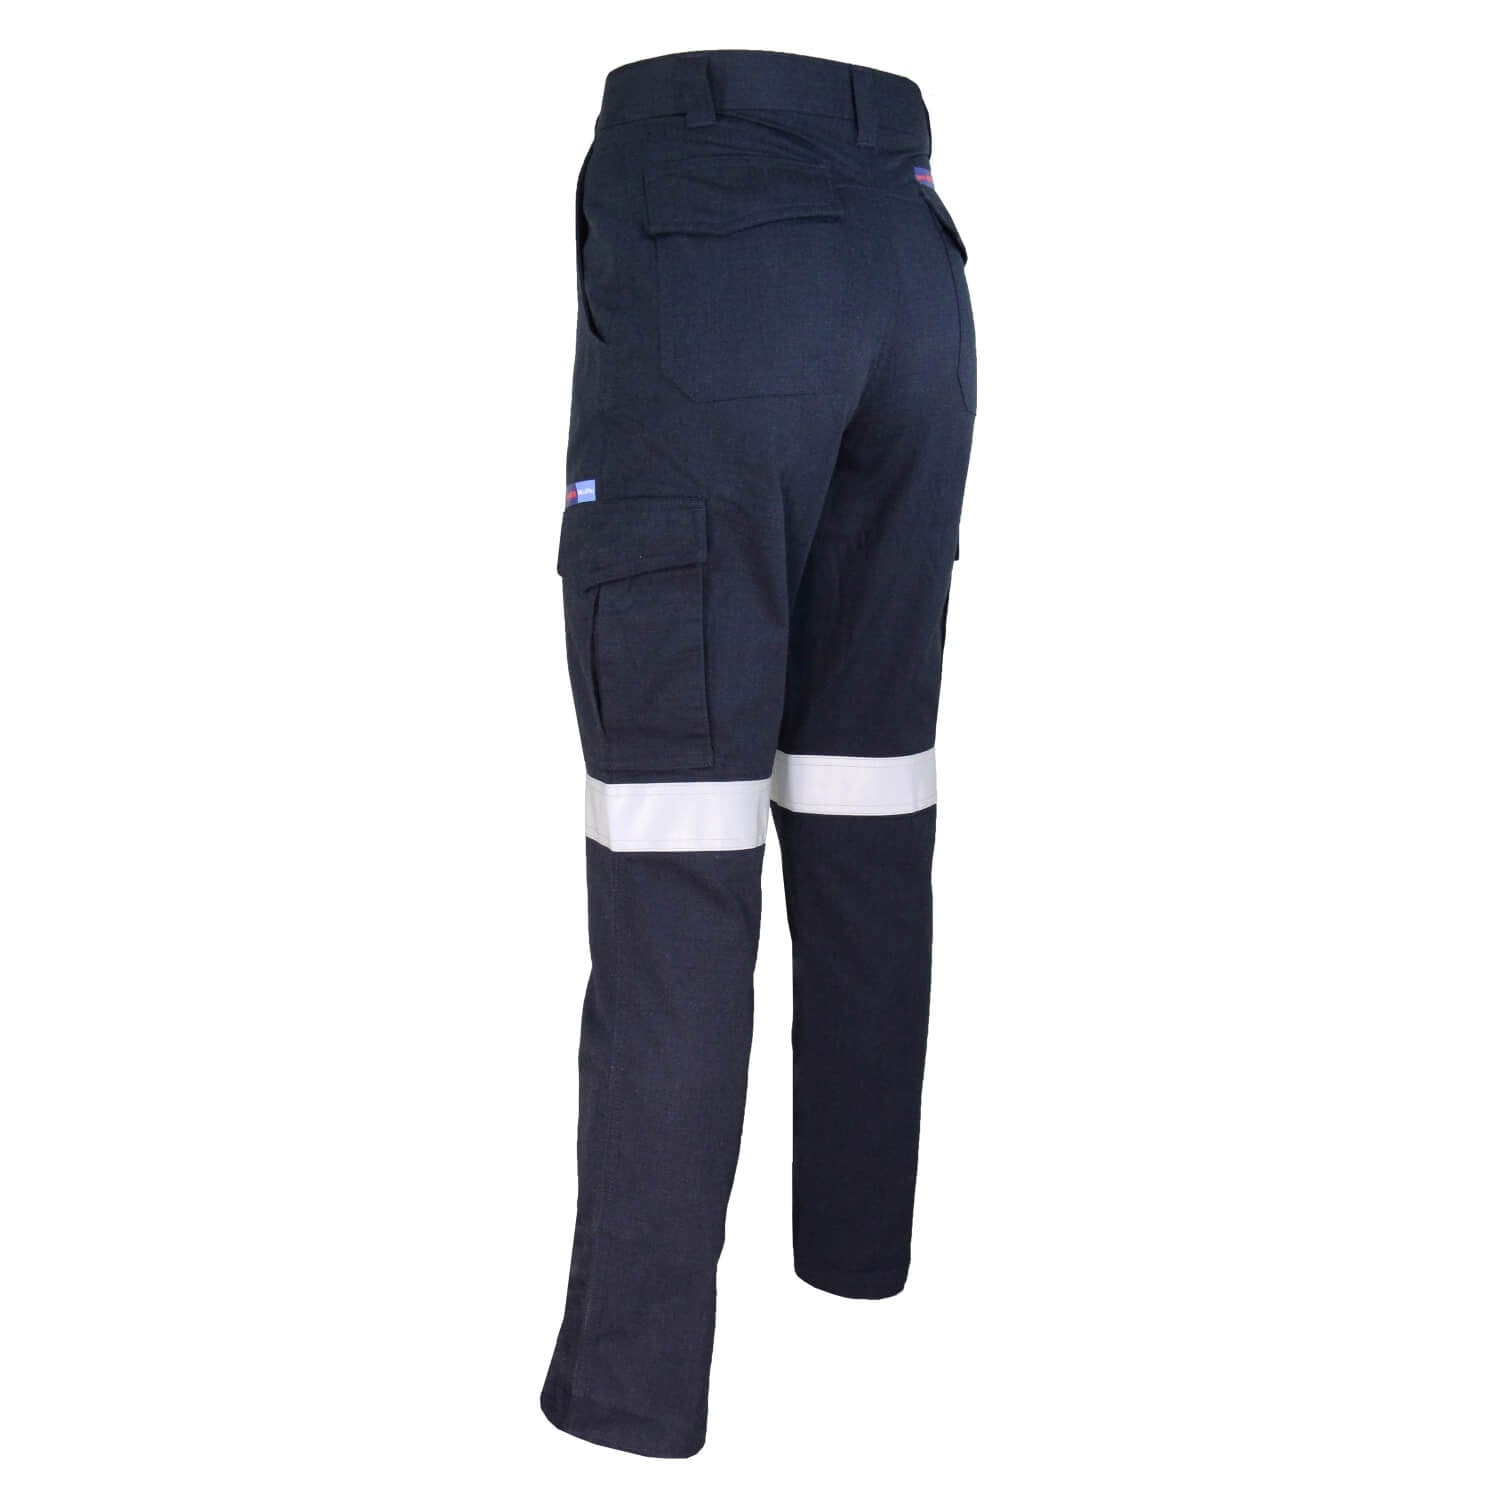 DNC Ladies Inherent FR PPE2 Taped Cargo Pants (3475)